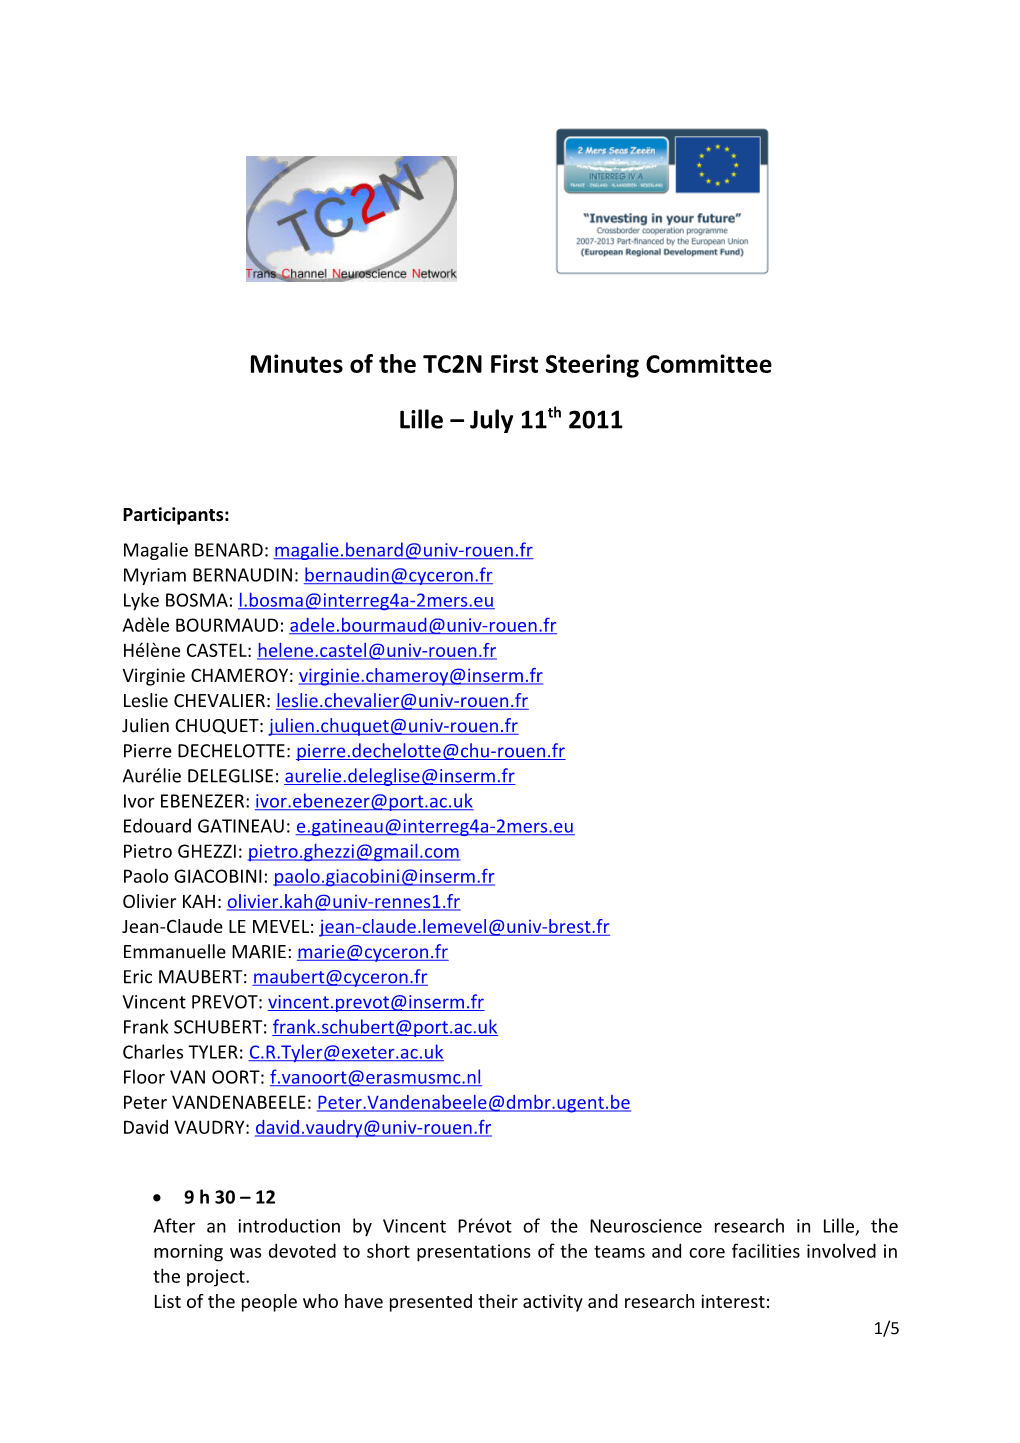 Minutes of the TC2N First Steering Committee